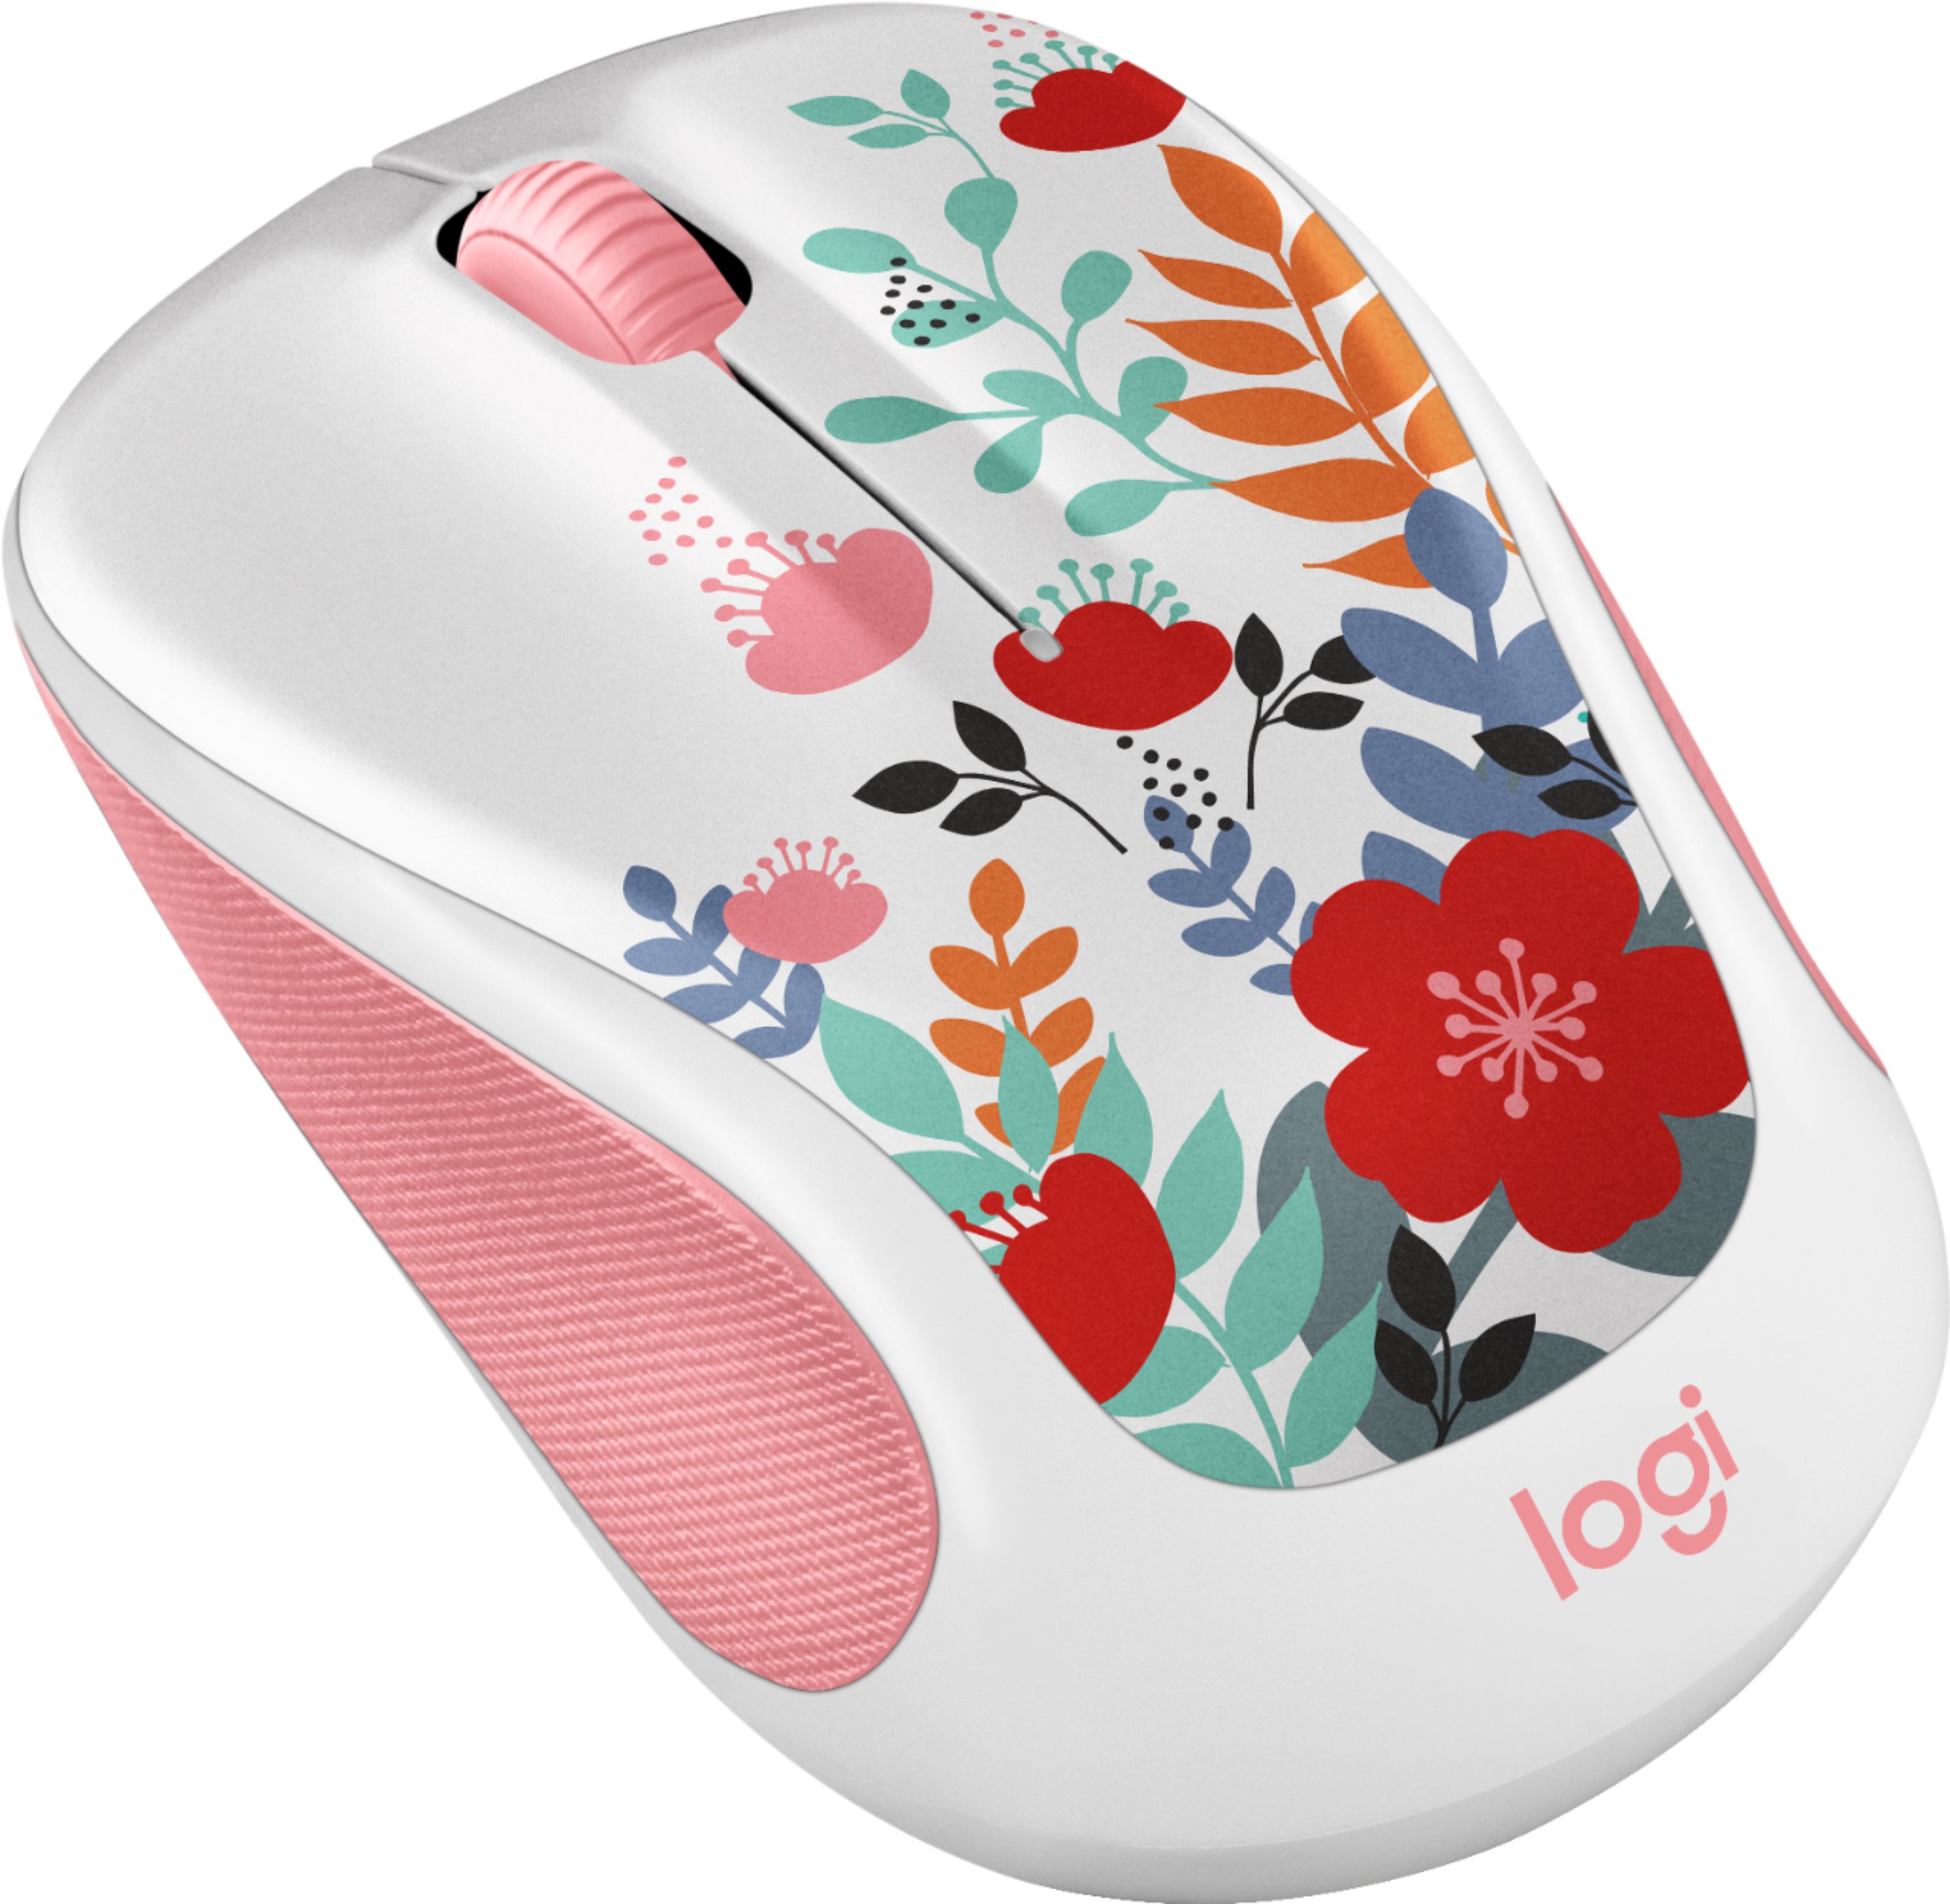 STPlus San Diego California United States of America Postcard City View 2.4 GHz Wireless Mouse with Ergonomic Design and Nano Receiver